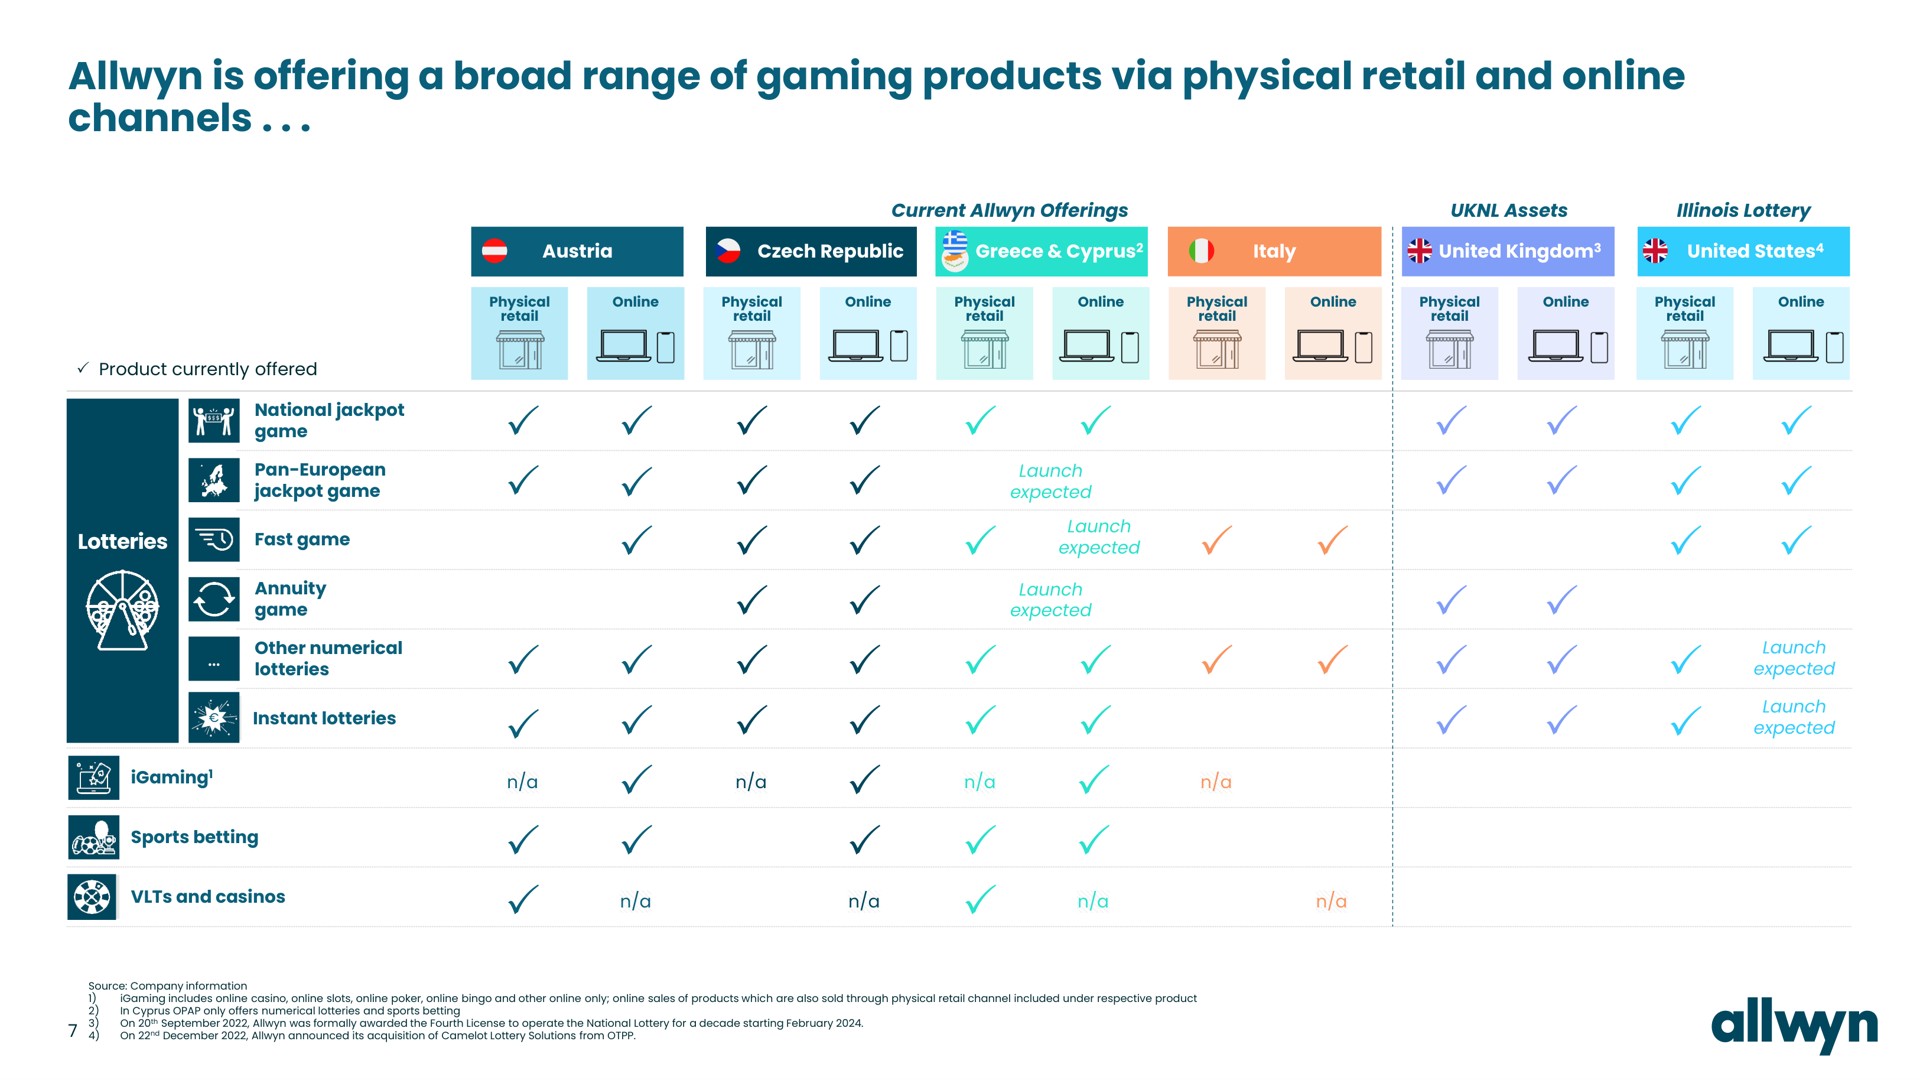 is offering a broad range of gaming products via physical retail and channels fast game i i i | Allwyn